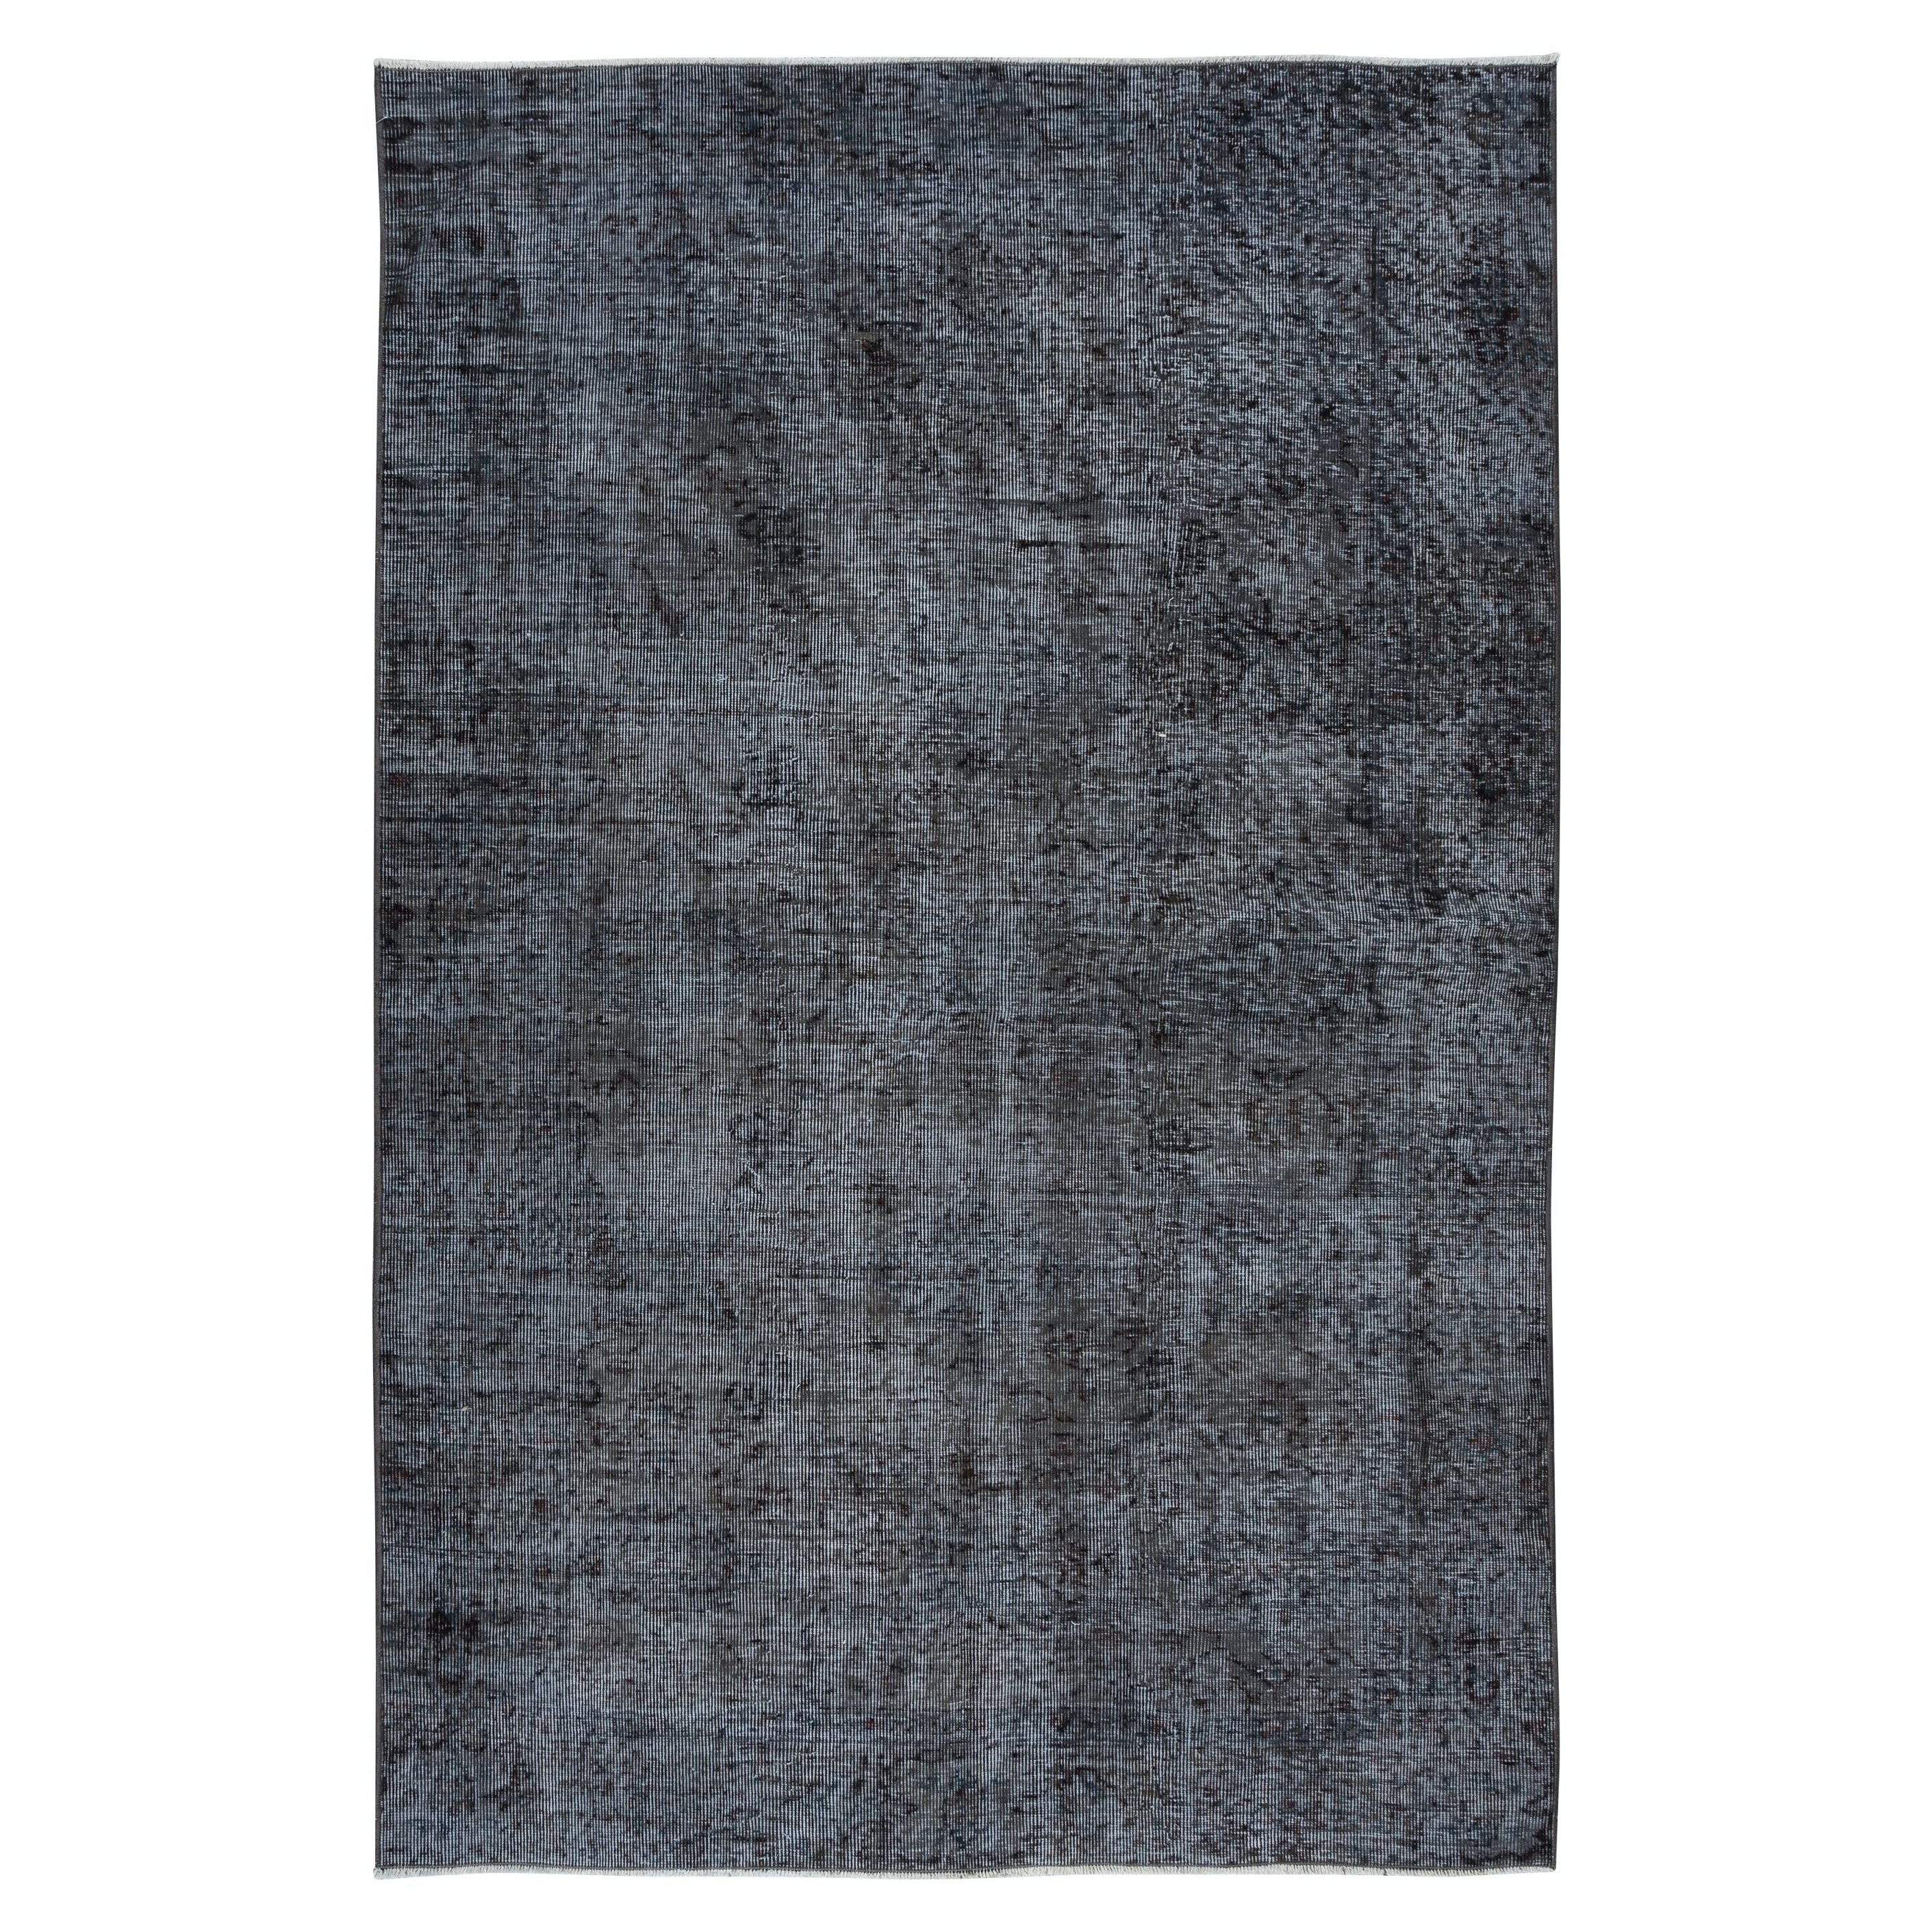 4.8x7.2 Ft Turkish Handmade Wool Rug in Gray Tones, Ideal for Modern Interiors For Sale